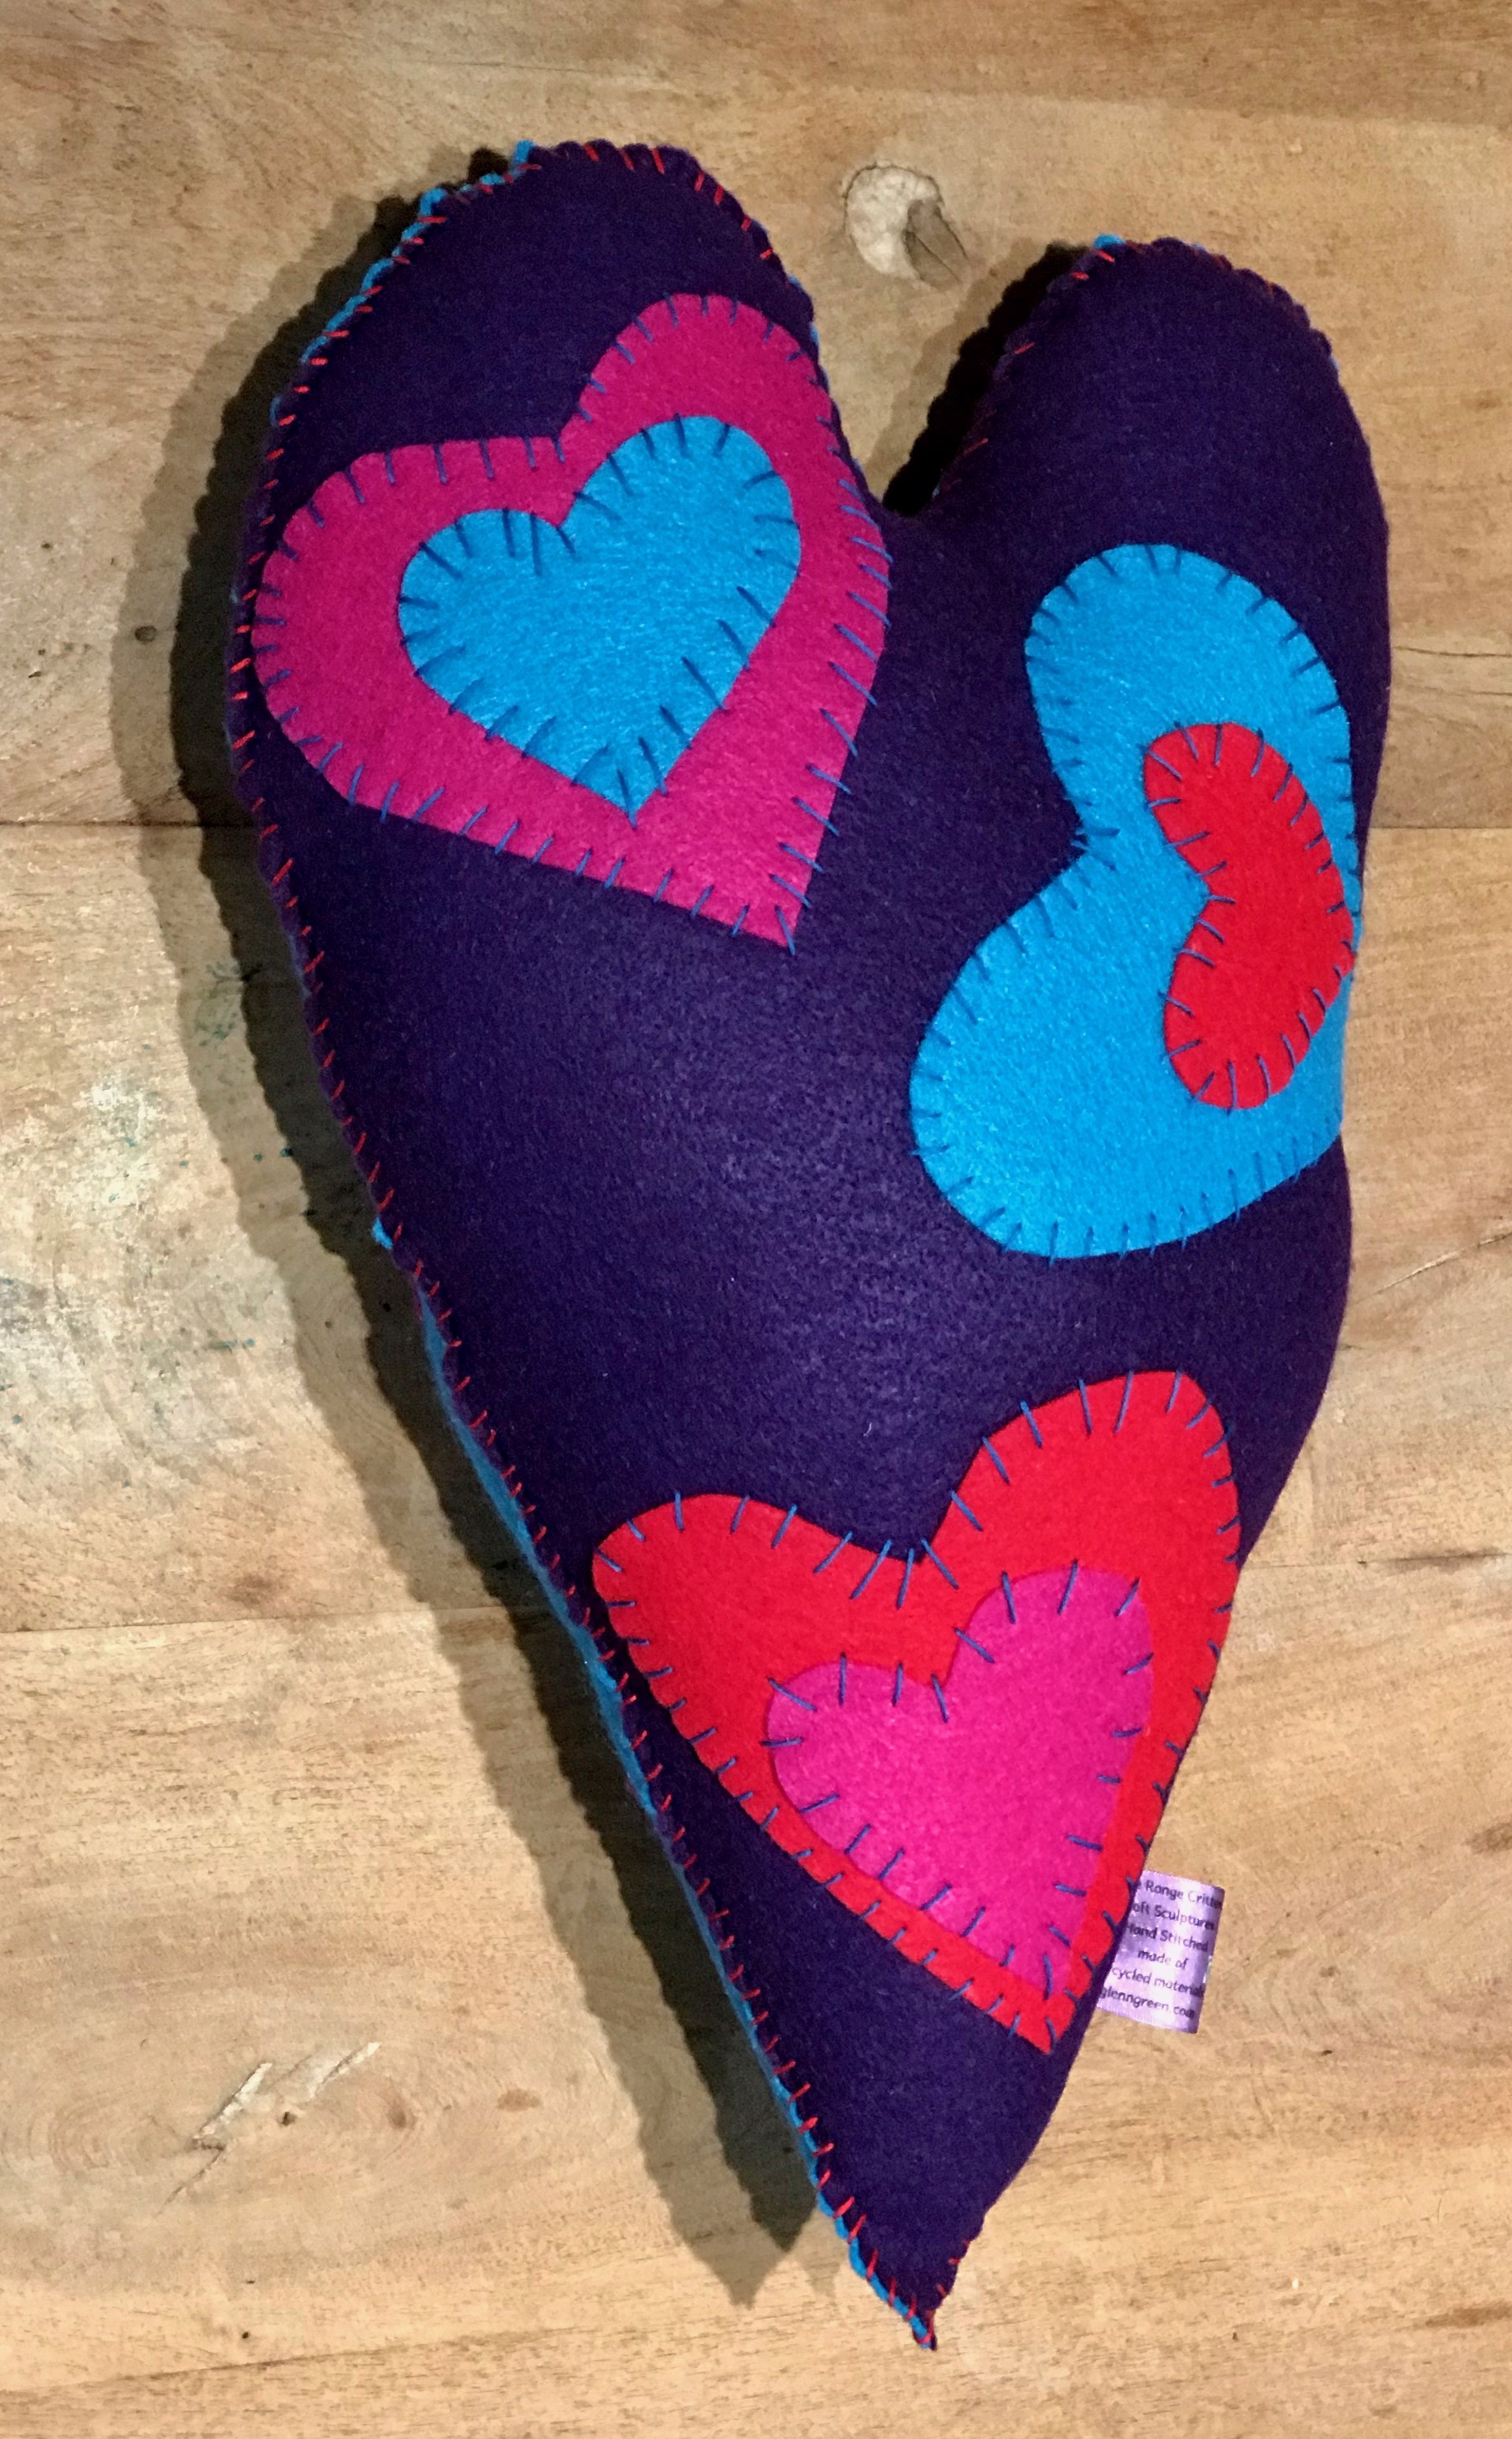 Soft Heart Turquoise and Dark Purple by Kerry Green